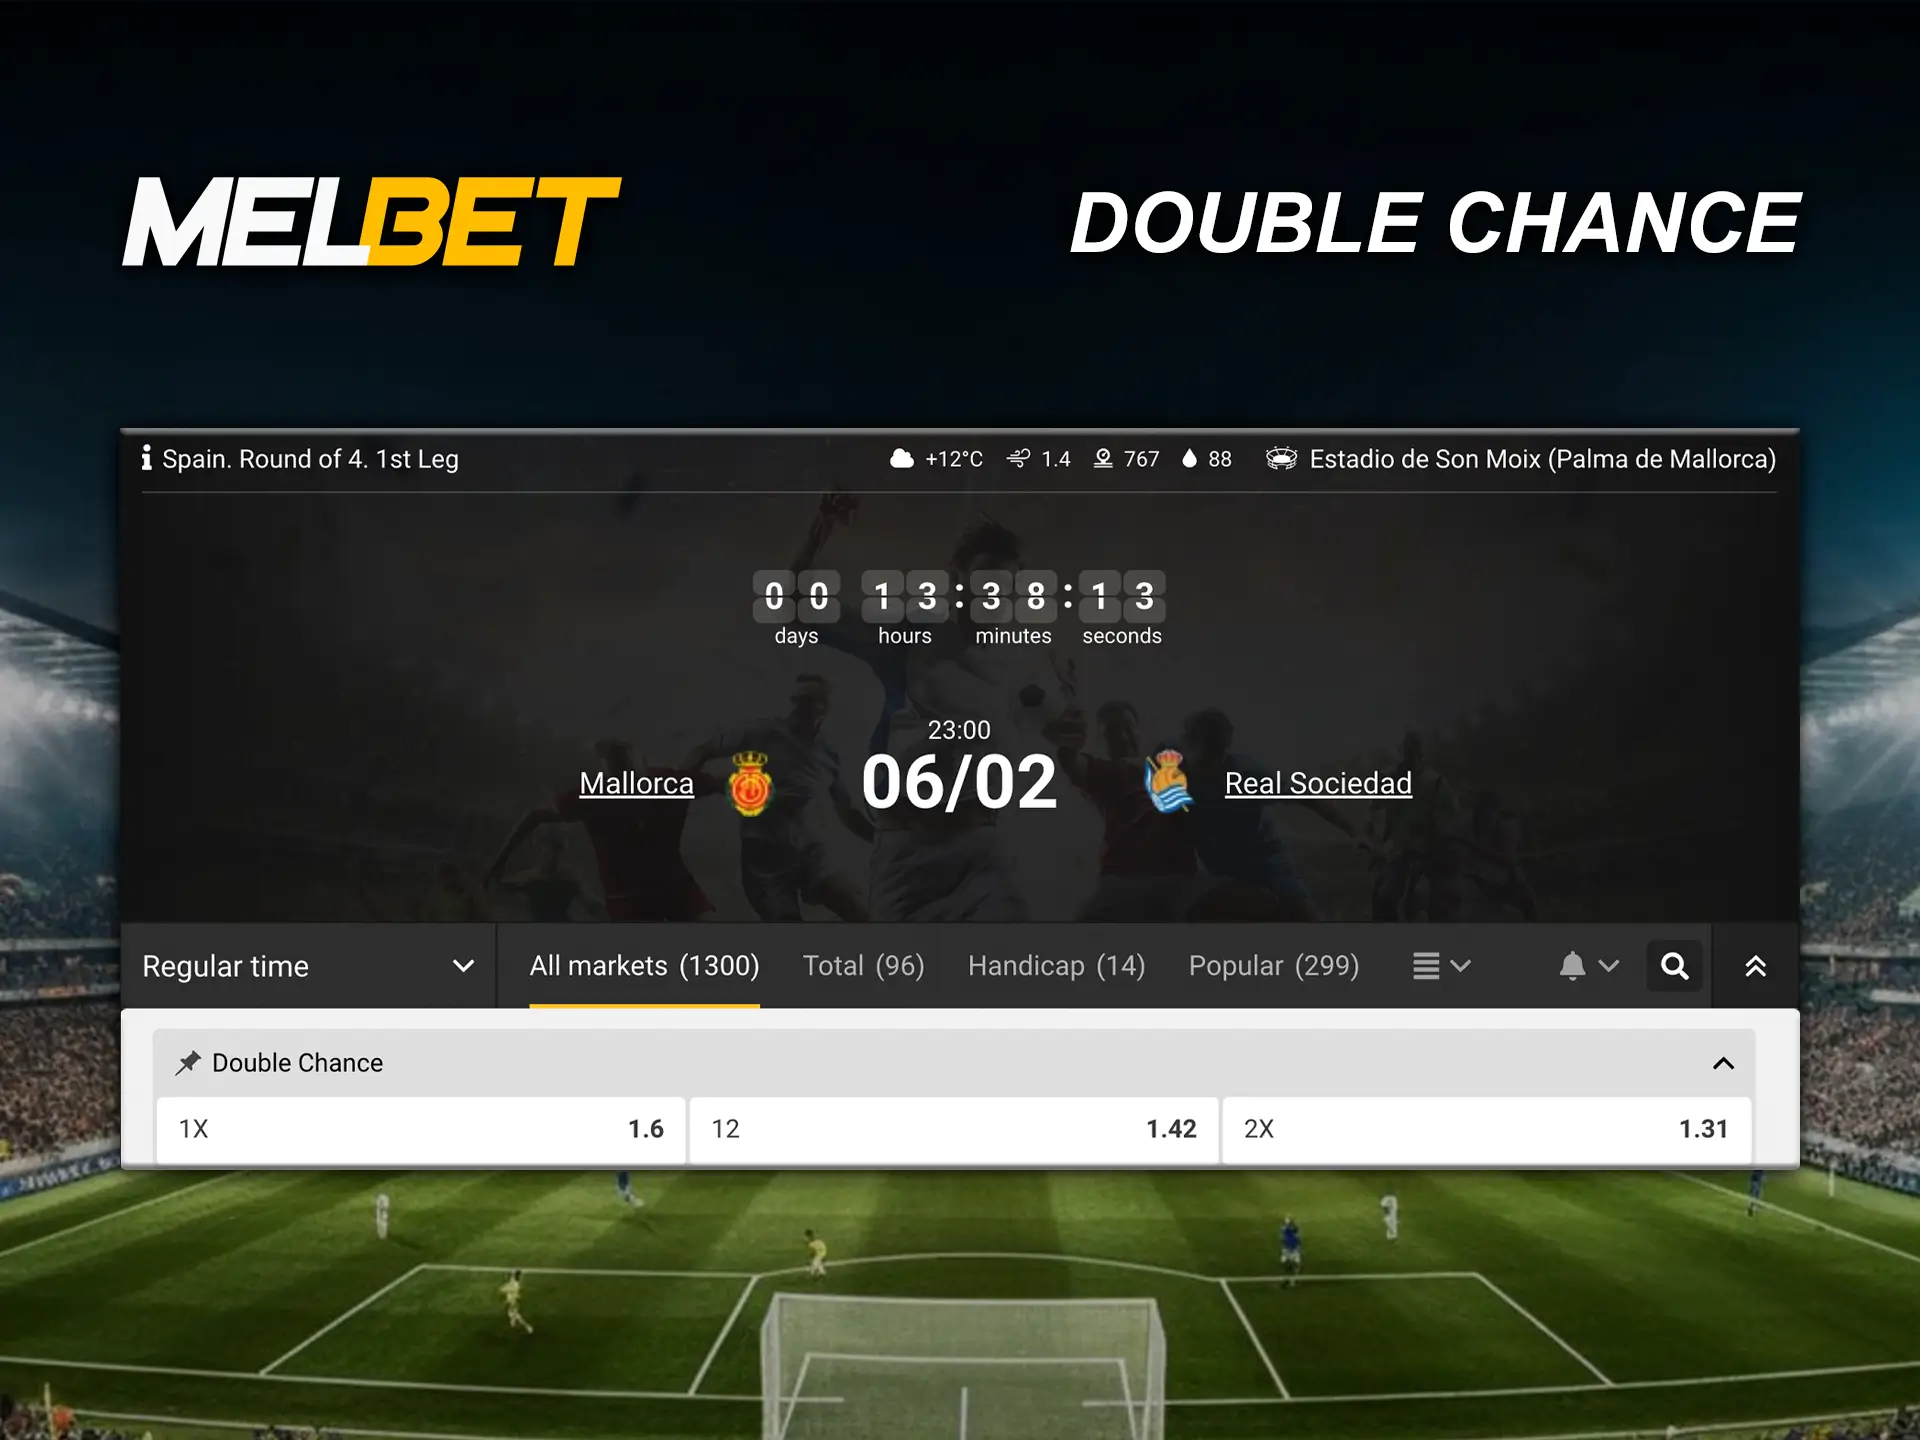 Double chance at Melbet involves low odds but a high winning percentage.